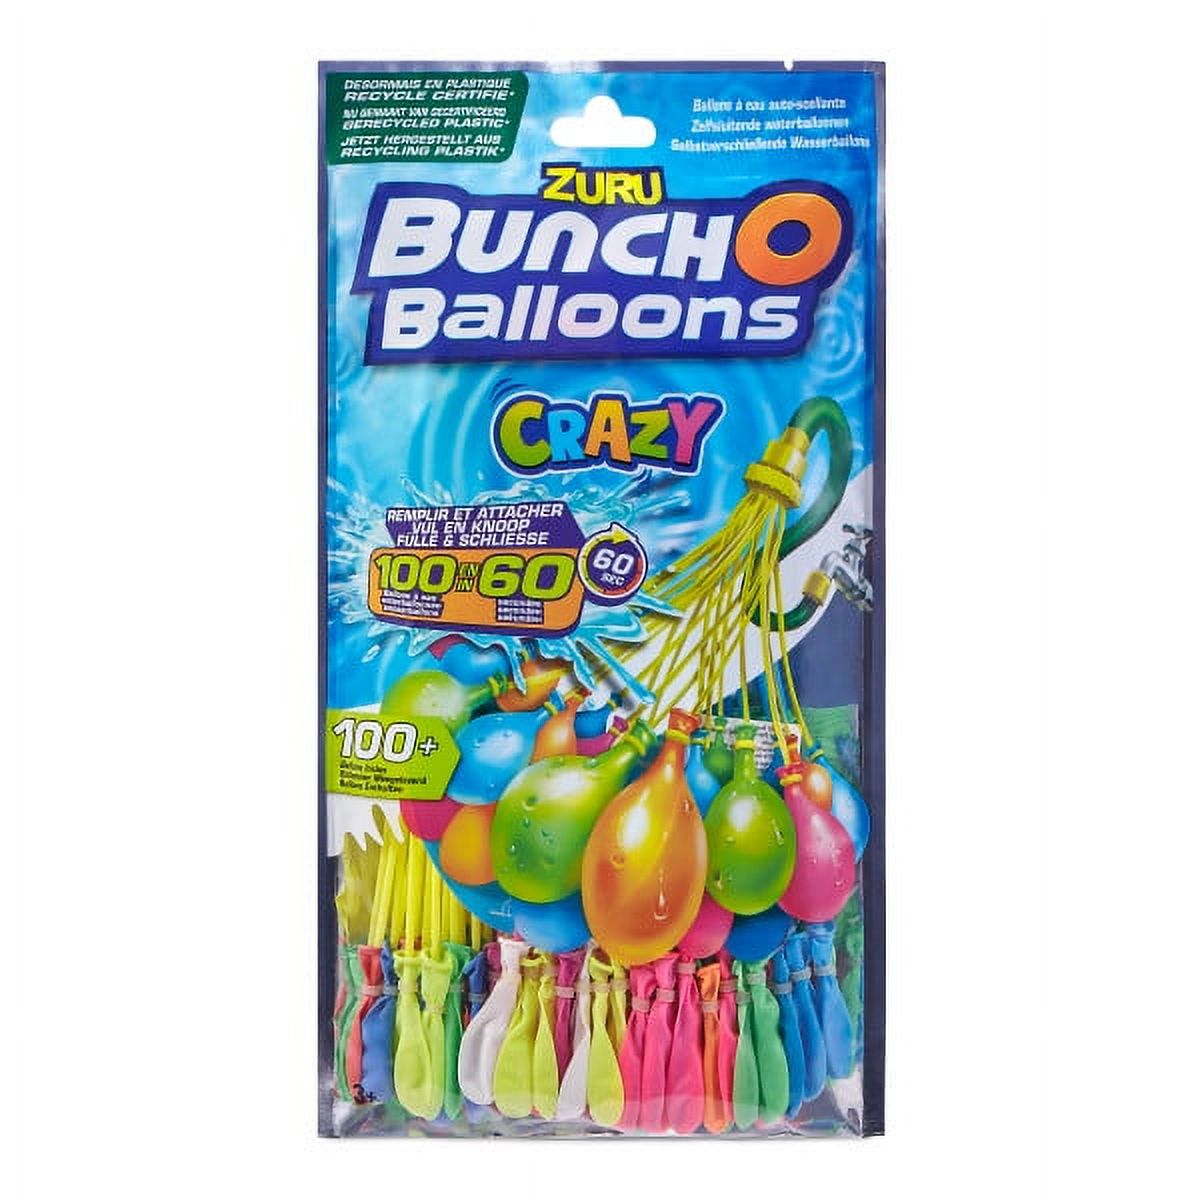 Crazy Bunch O Balloons 100 Rapid-Filling Self-Sealing Water Balloons (3 Pack) by ZURU - image 1 of 7